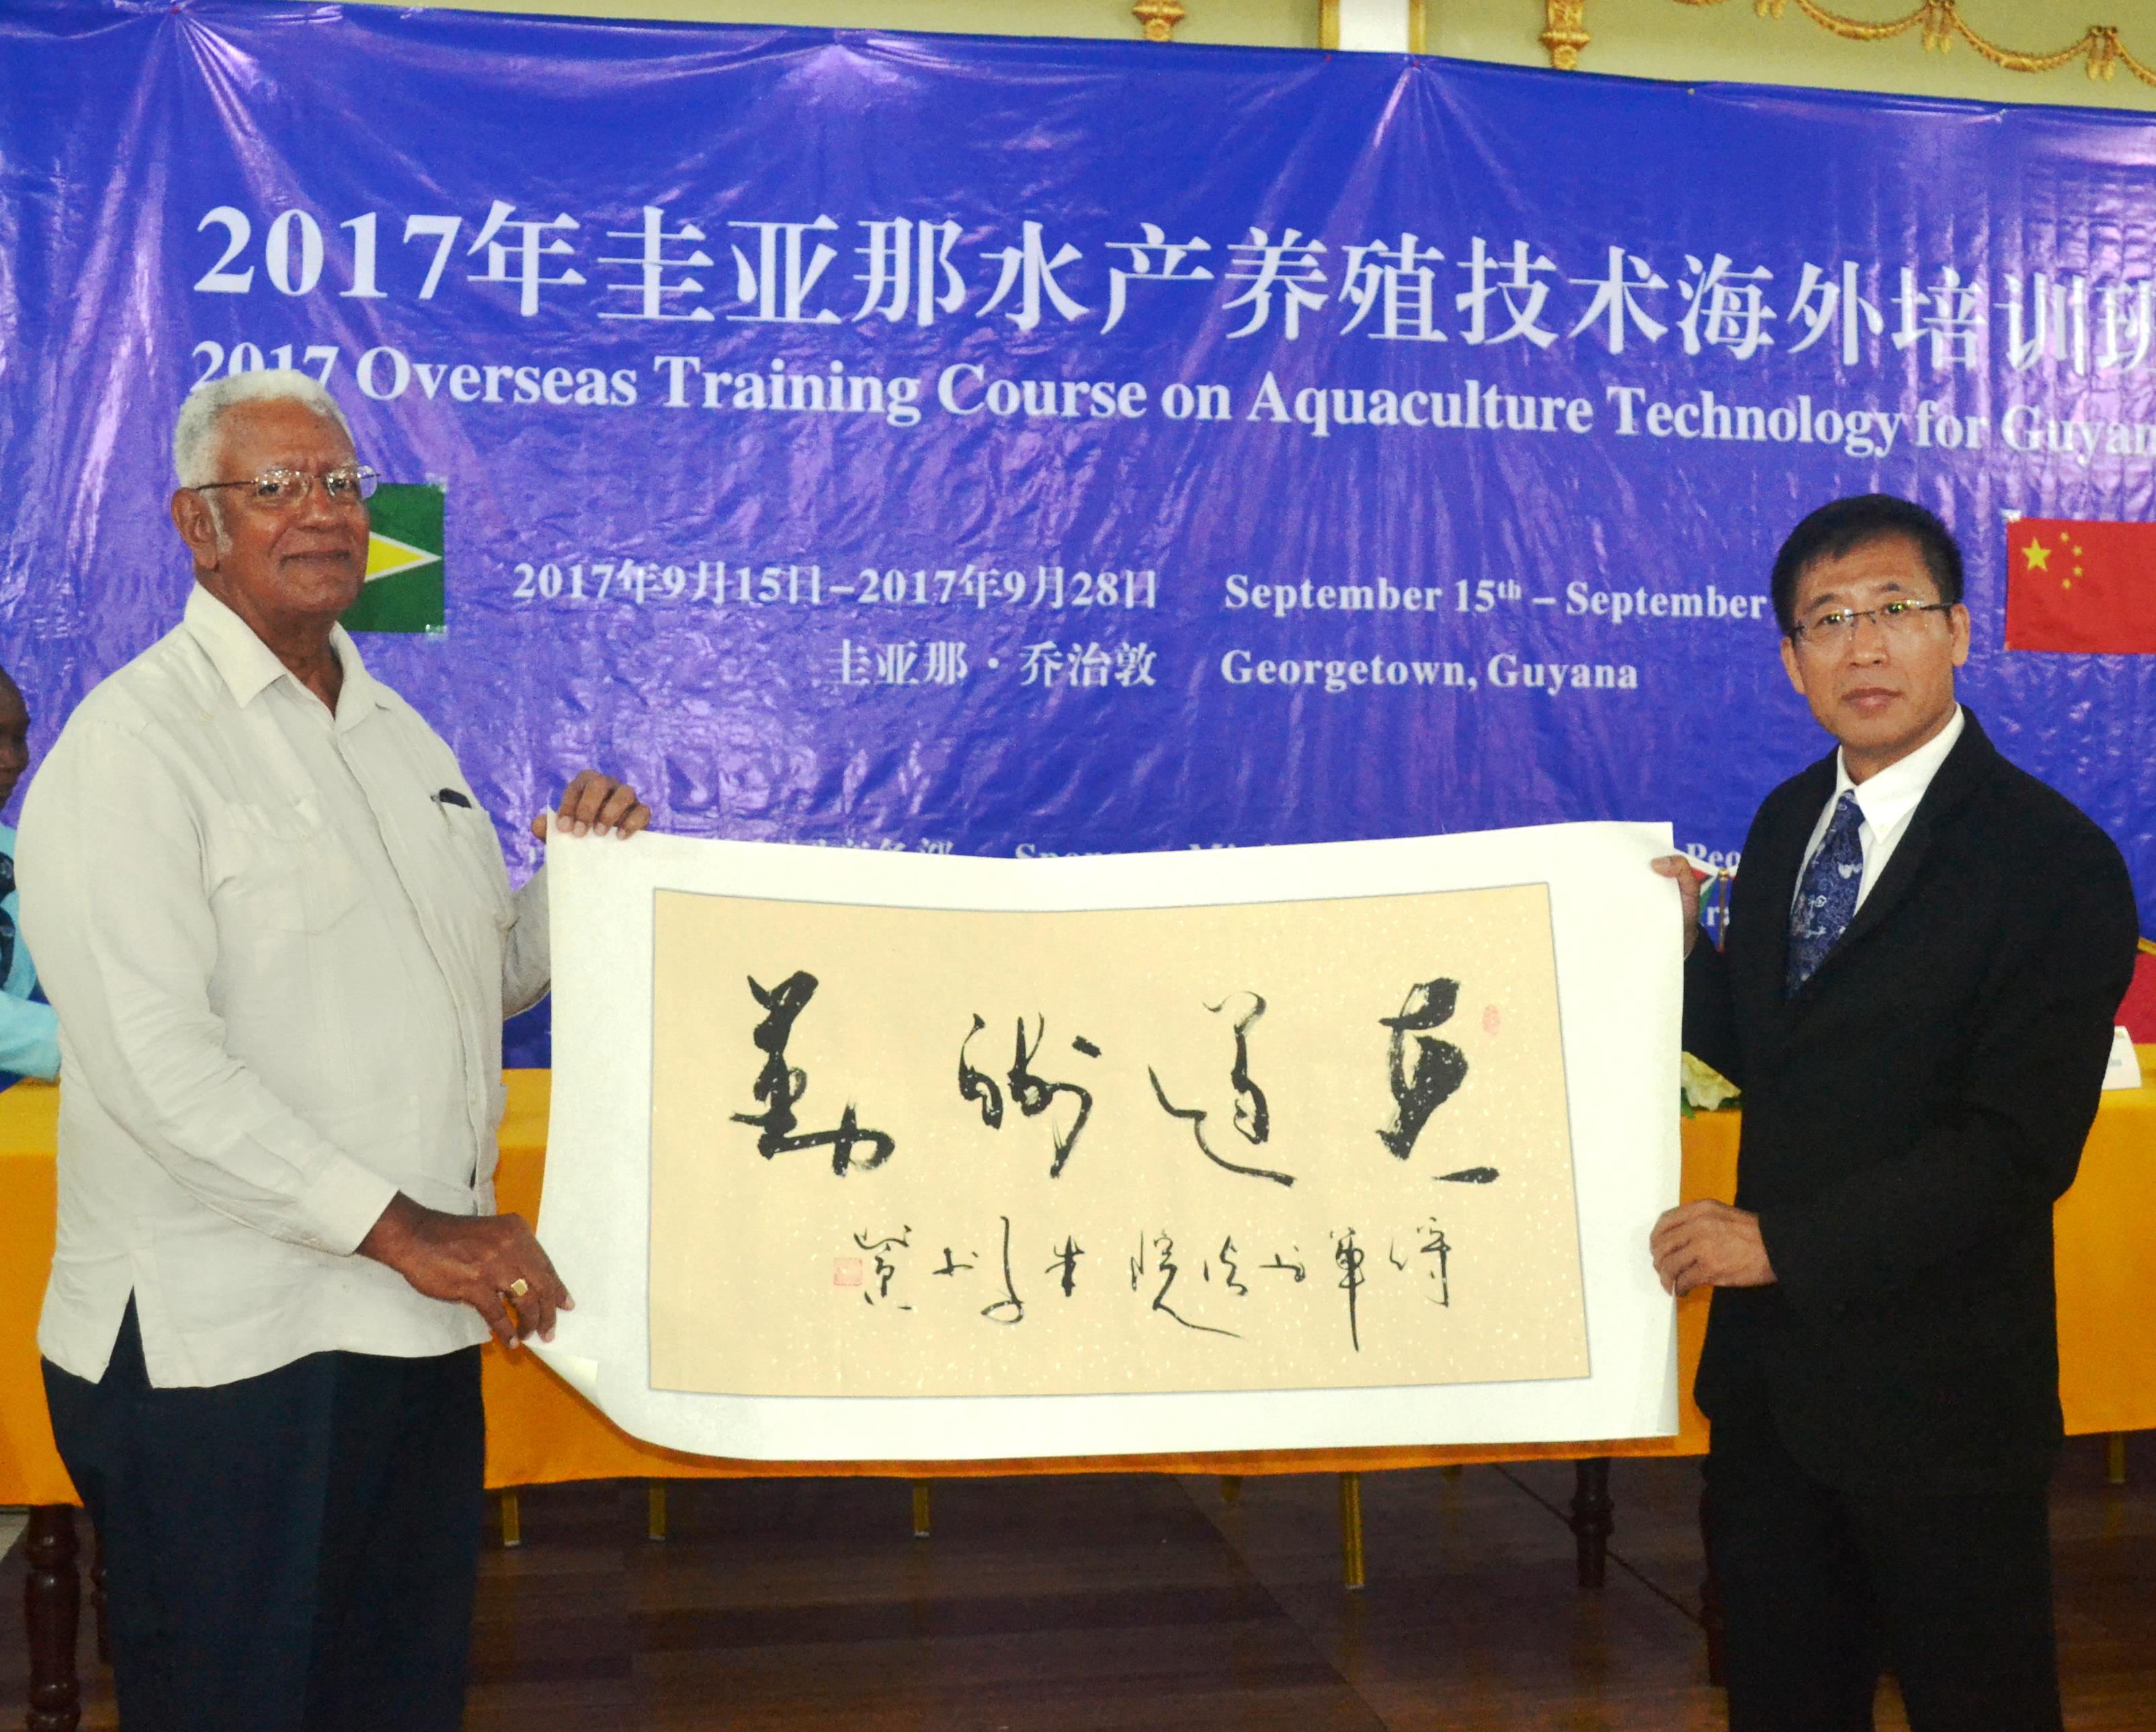 Minister Holder receives a token from Mr. Mingzhe